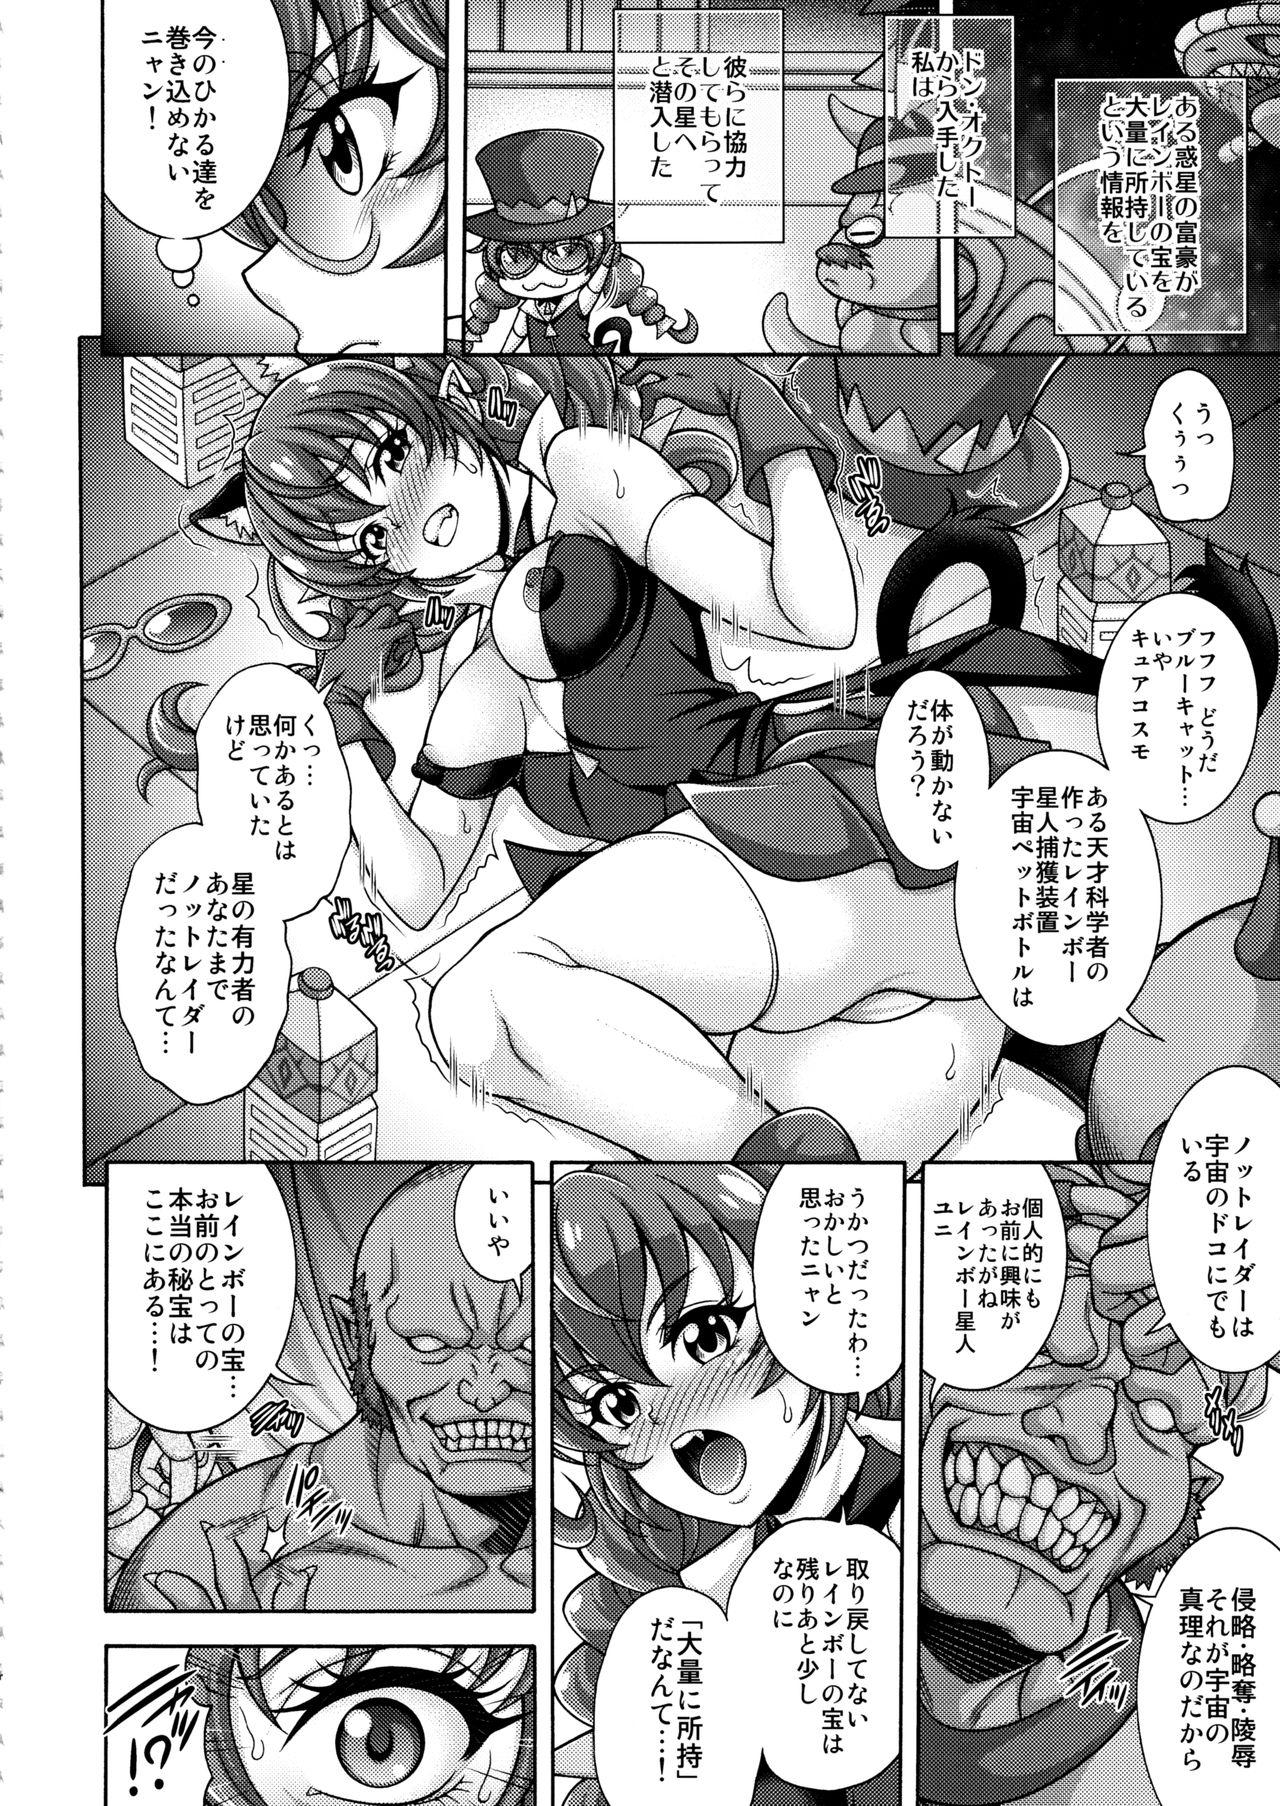 Sexy Sluts Harameite Ginga - Star twinkle precure Indoor - Page 3